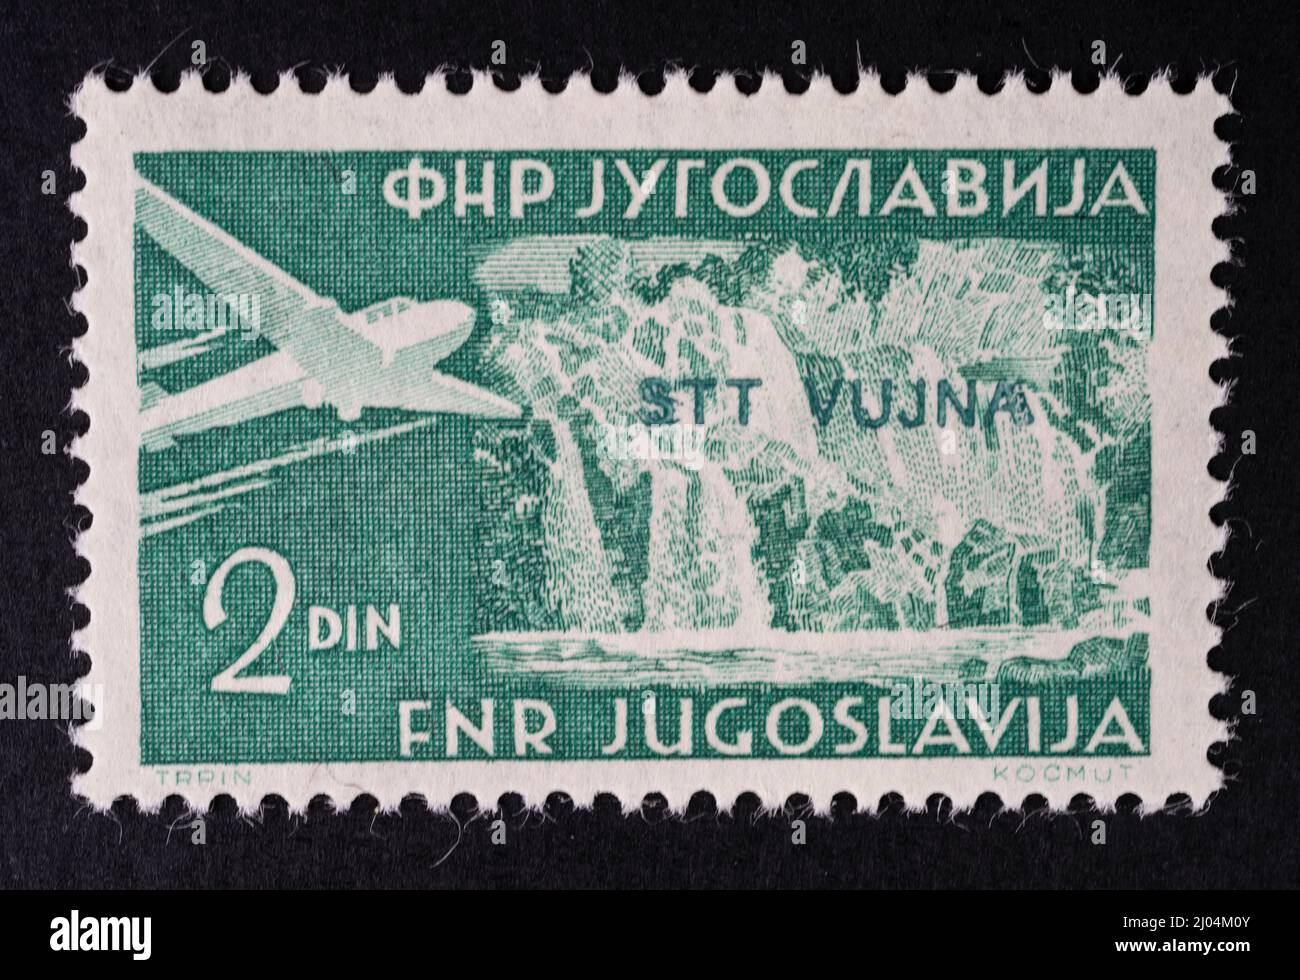 Commemorative stamp of Plitvice waterfalls from the former Yugoslavia with the overprint of the free territory of Trieste, zone B of the year 1954 Stock Photo